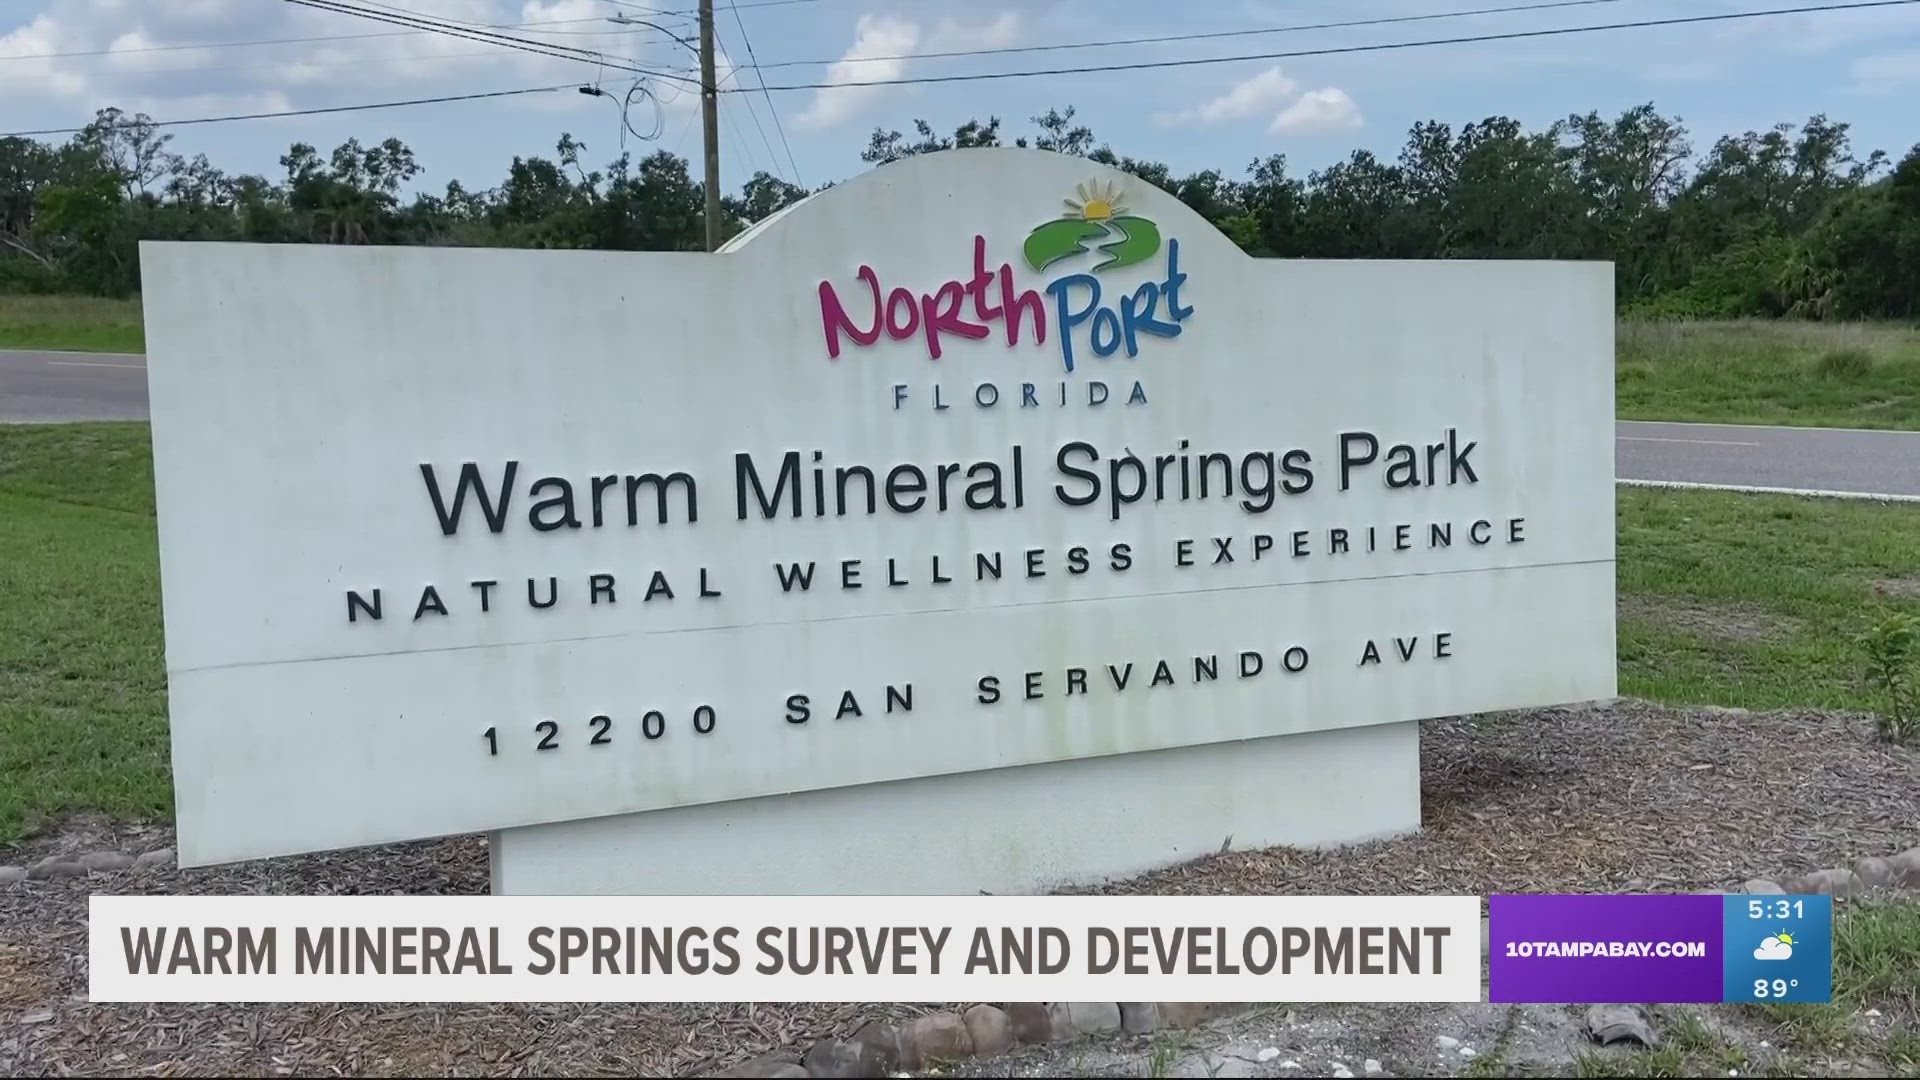 City of North Port commissioners will discuss the findings of the survey in detail at the July 10 workshop.